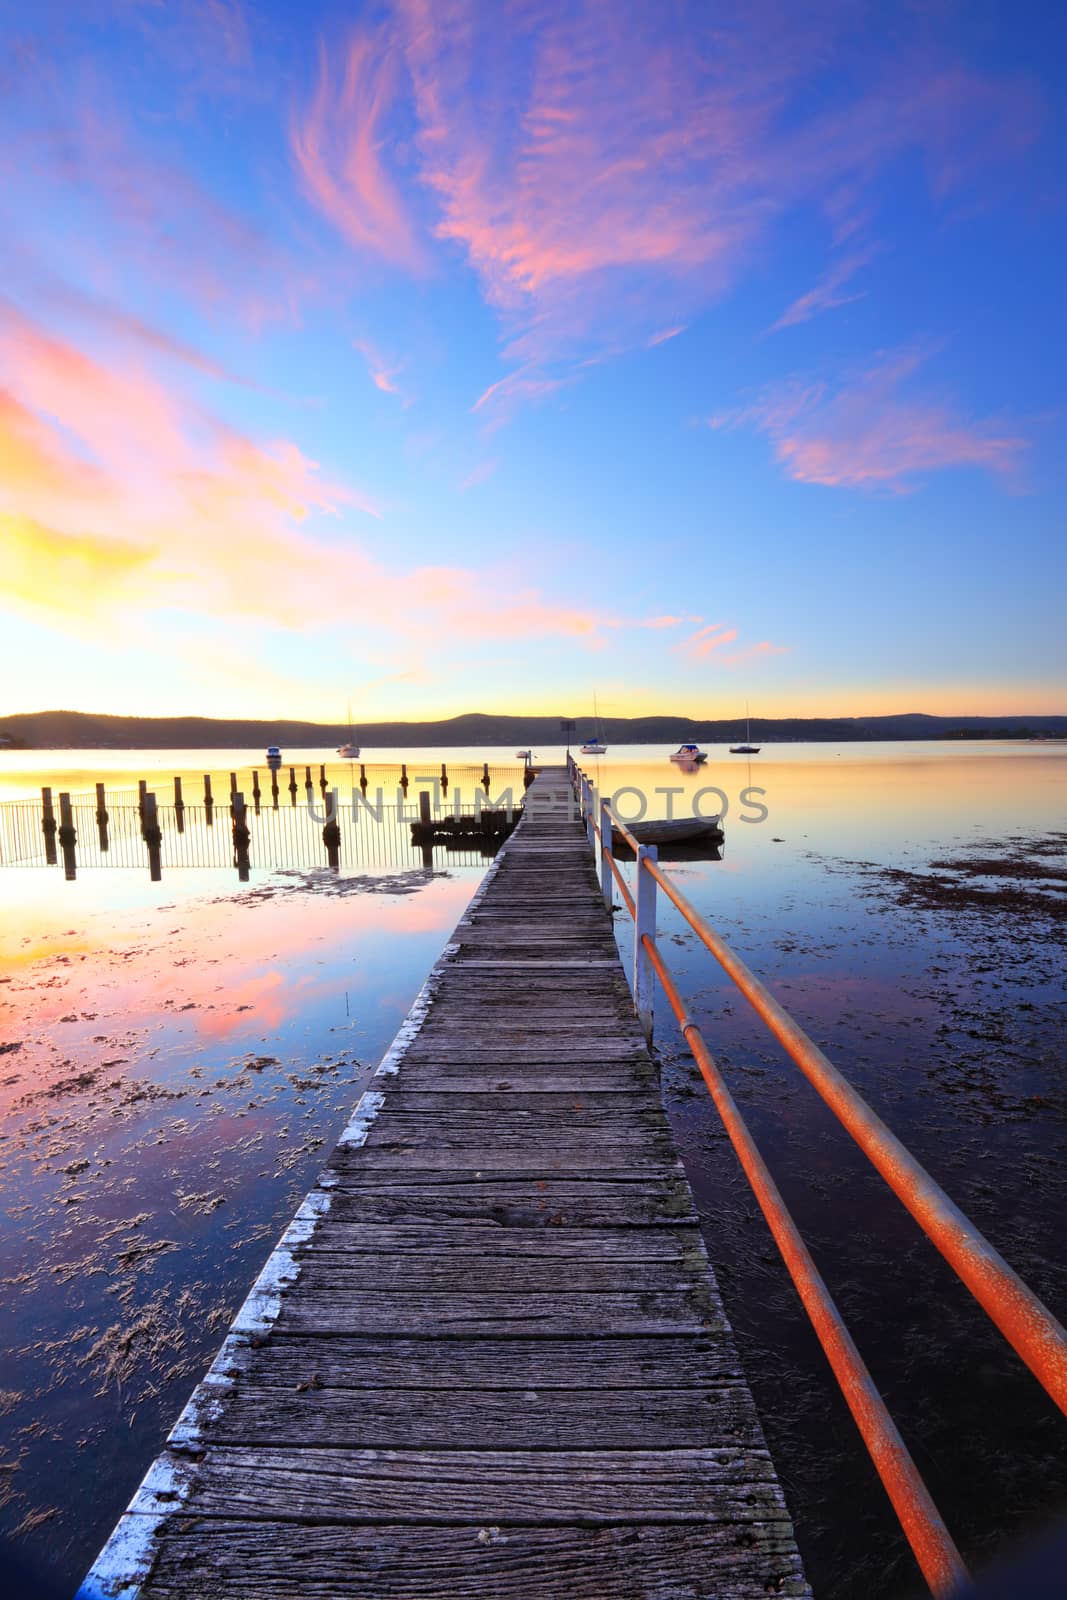 A pretty summer sunset at Yattalunga on the NSW Central Coast.   The long jetty leads to a pool and public wharf.  